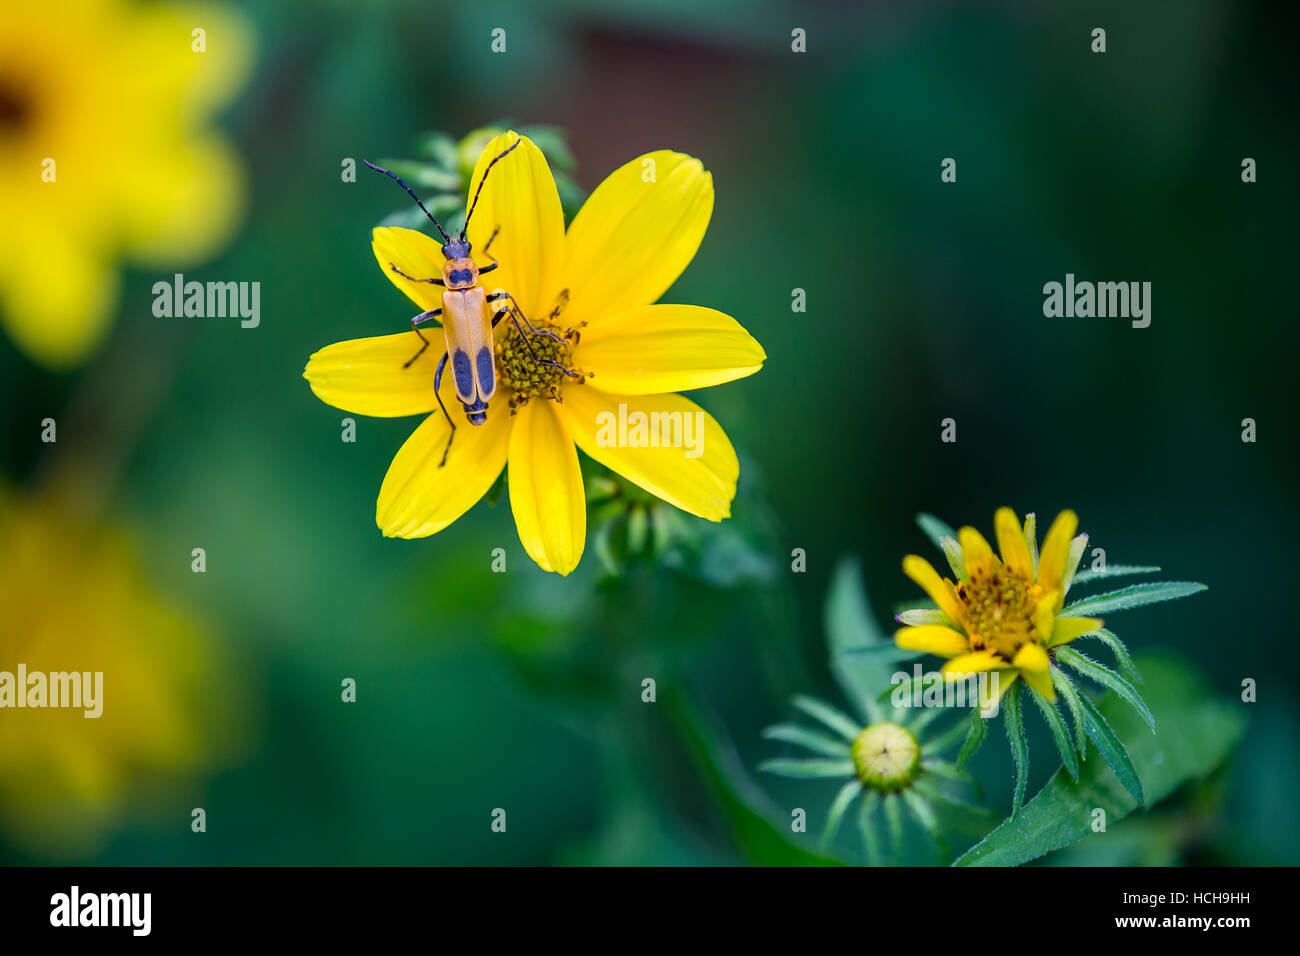 Orange and black Pennsylvania Leatherwing Beetle on the yellow petals of a Biden flower with more flowers de-focused in the background Stock Photo